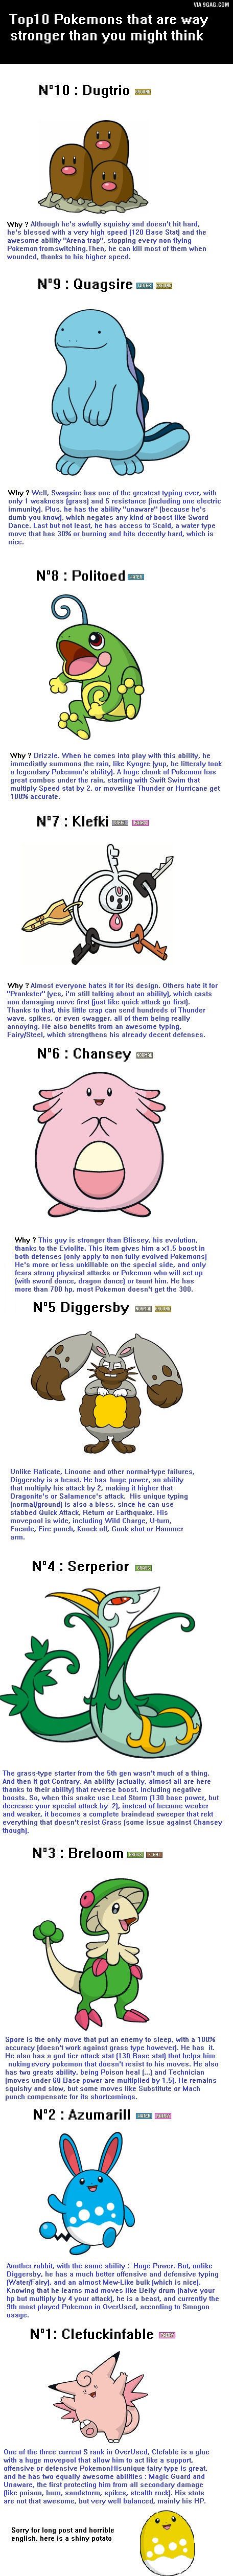 Top 10 Pokemons that are way stronger than you think